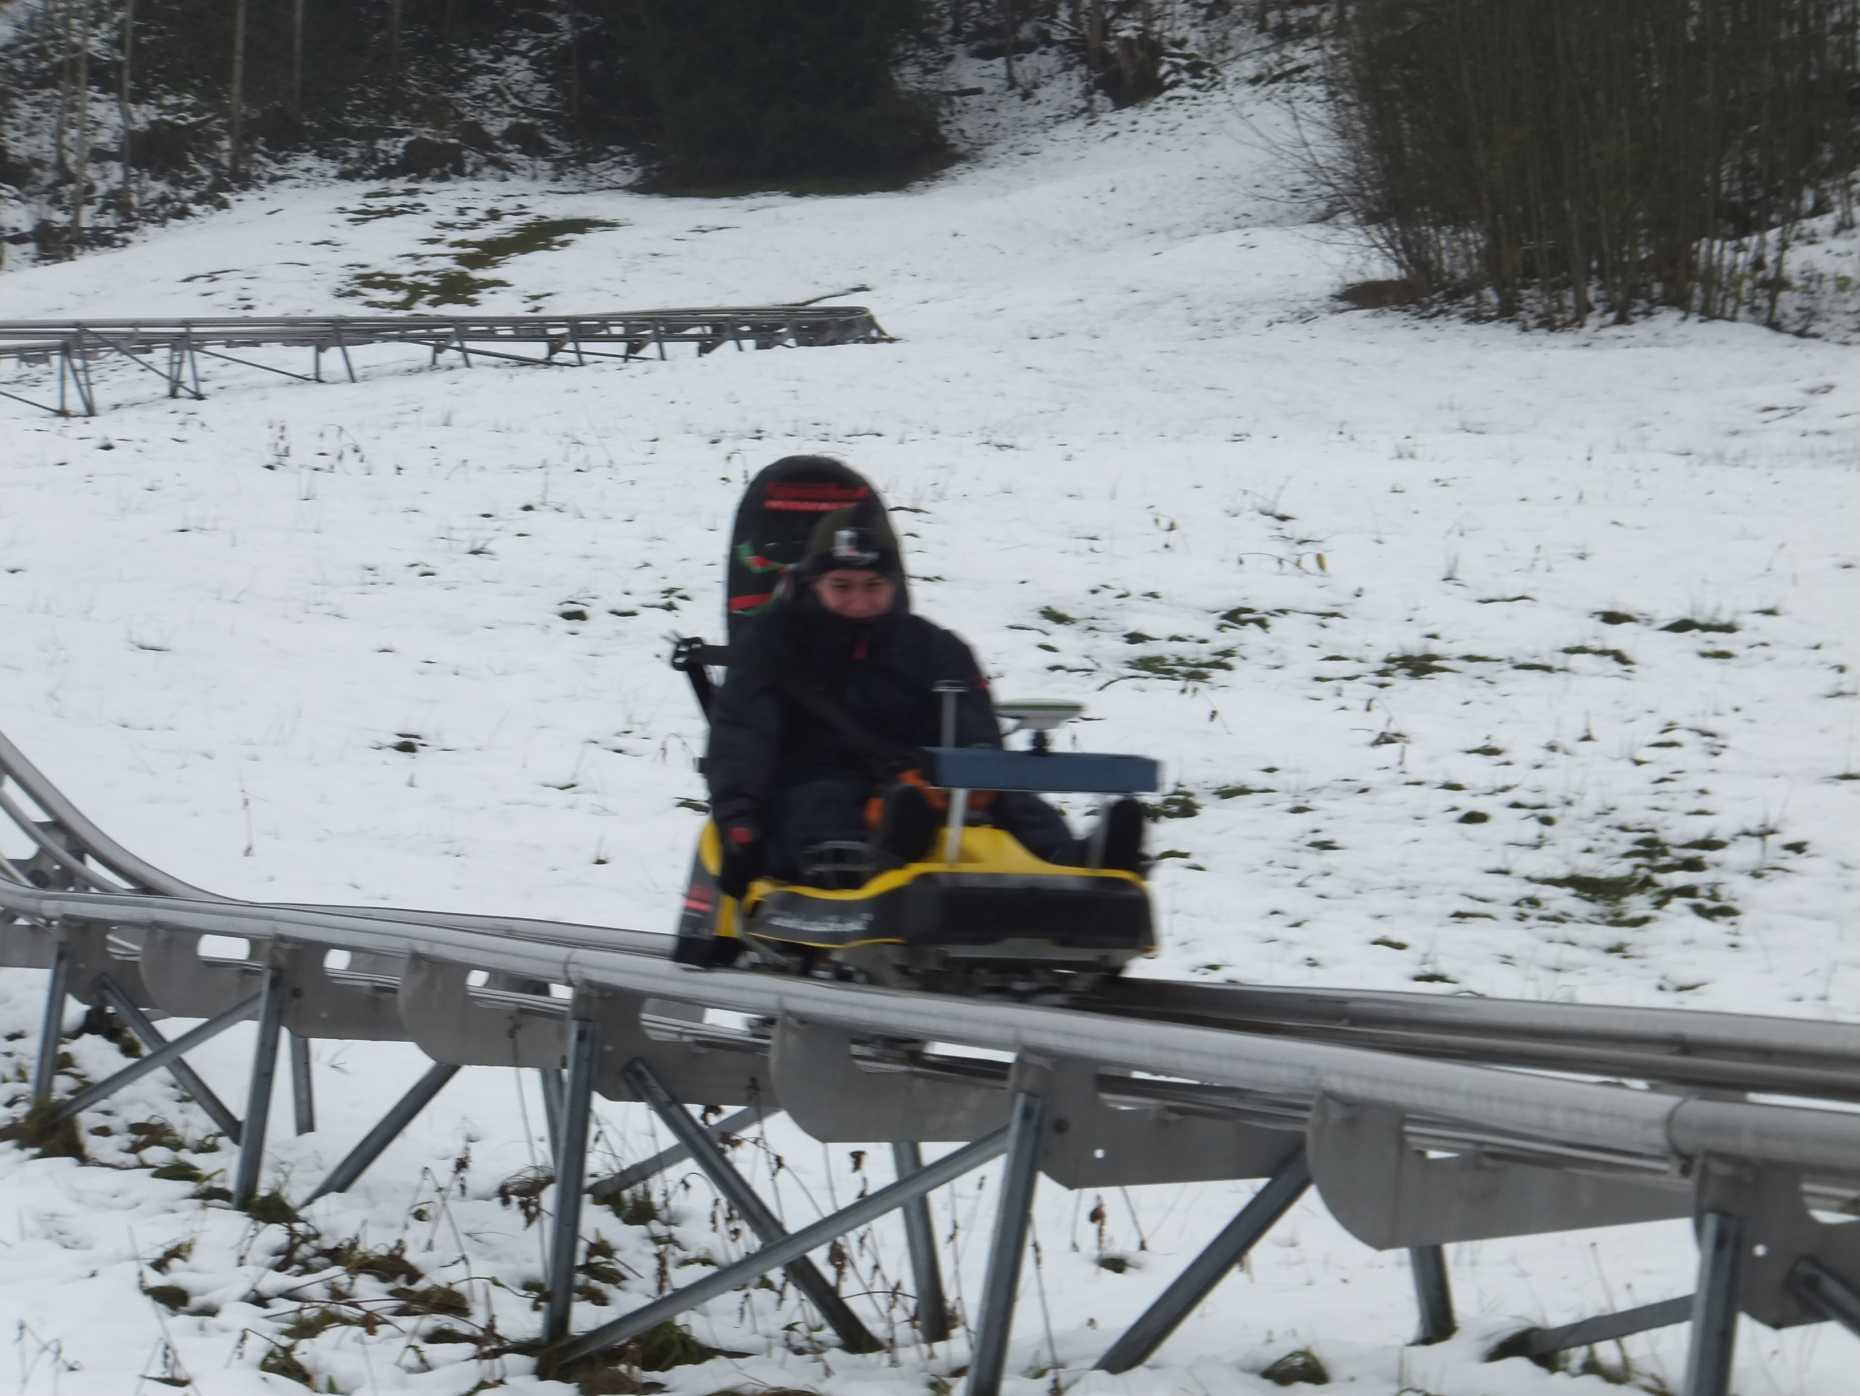 An image showing the modified sleigh